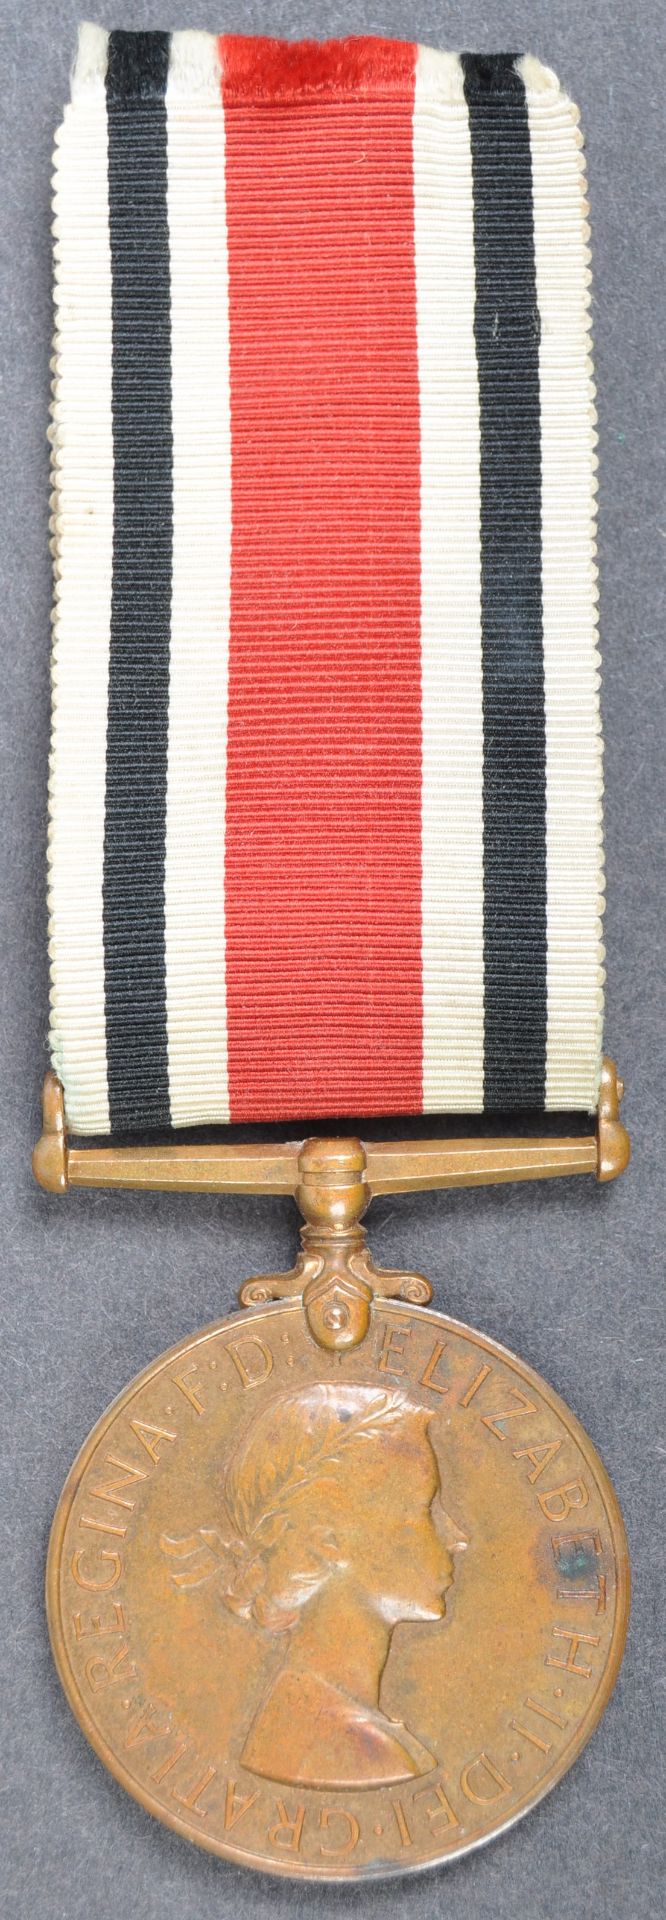 SPECIAL CONSTABULARY LONG SERVICE POLICE MEDAL